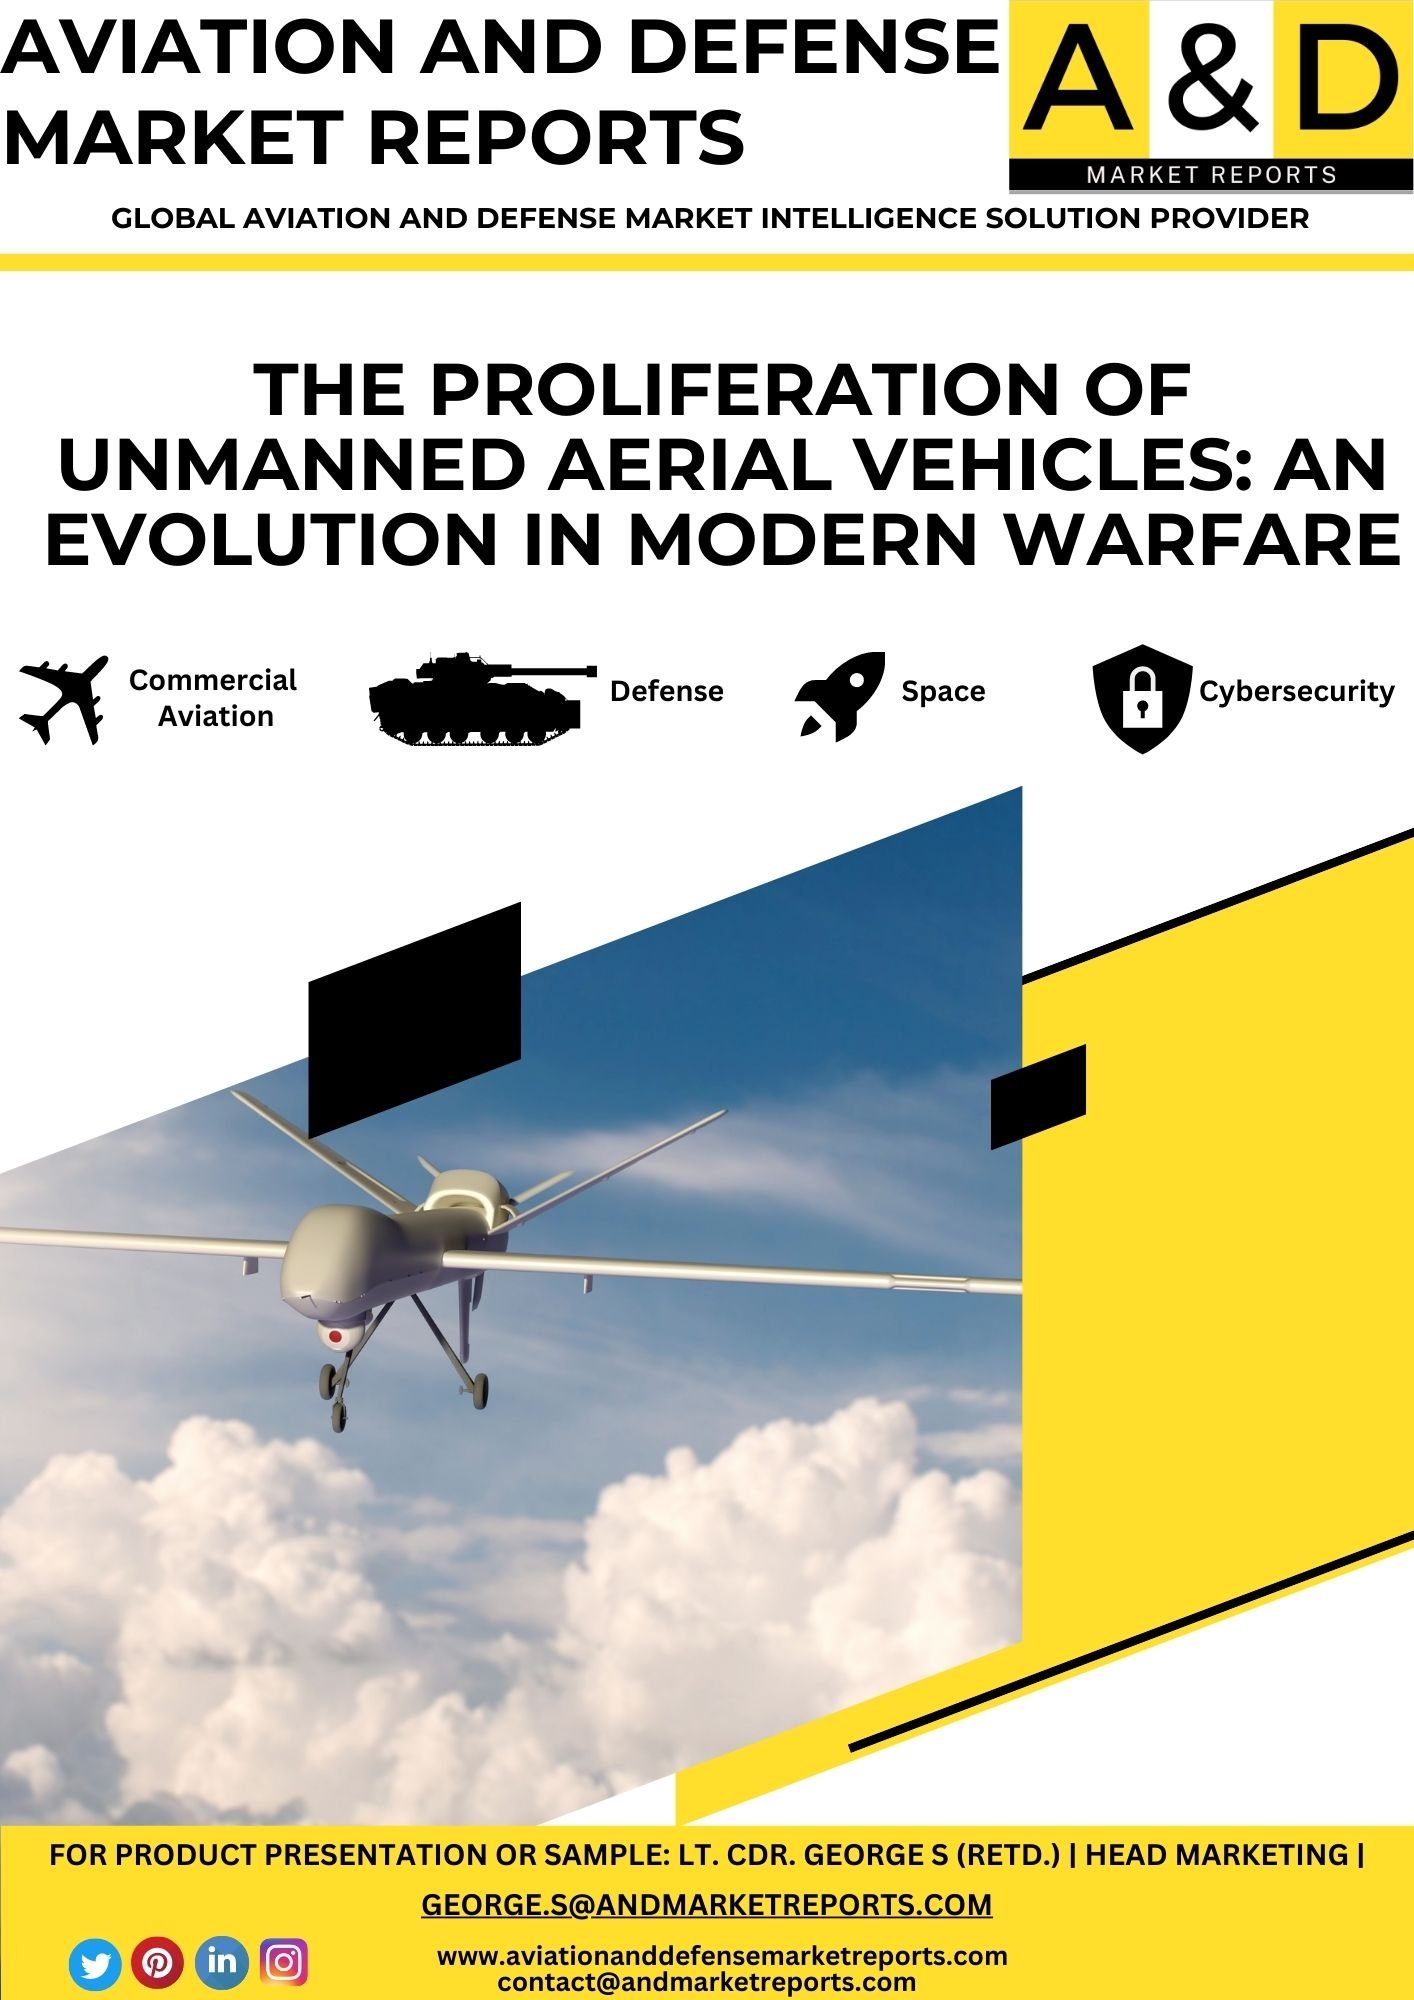 The Proliferation Of Unmanned Aerial Vehicles: An Evolution In Modern Warfare